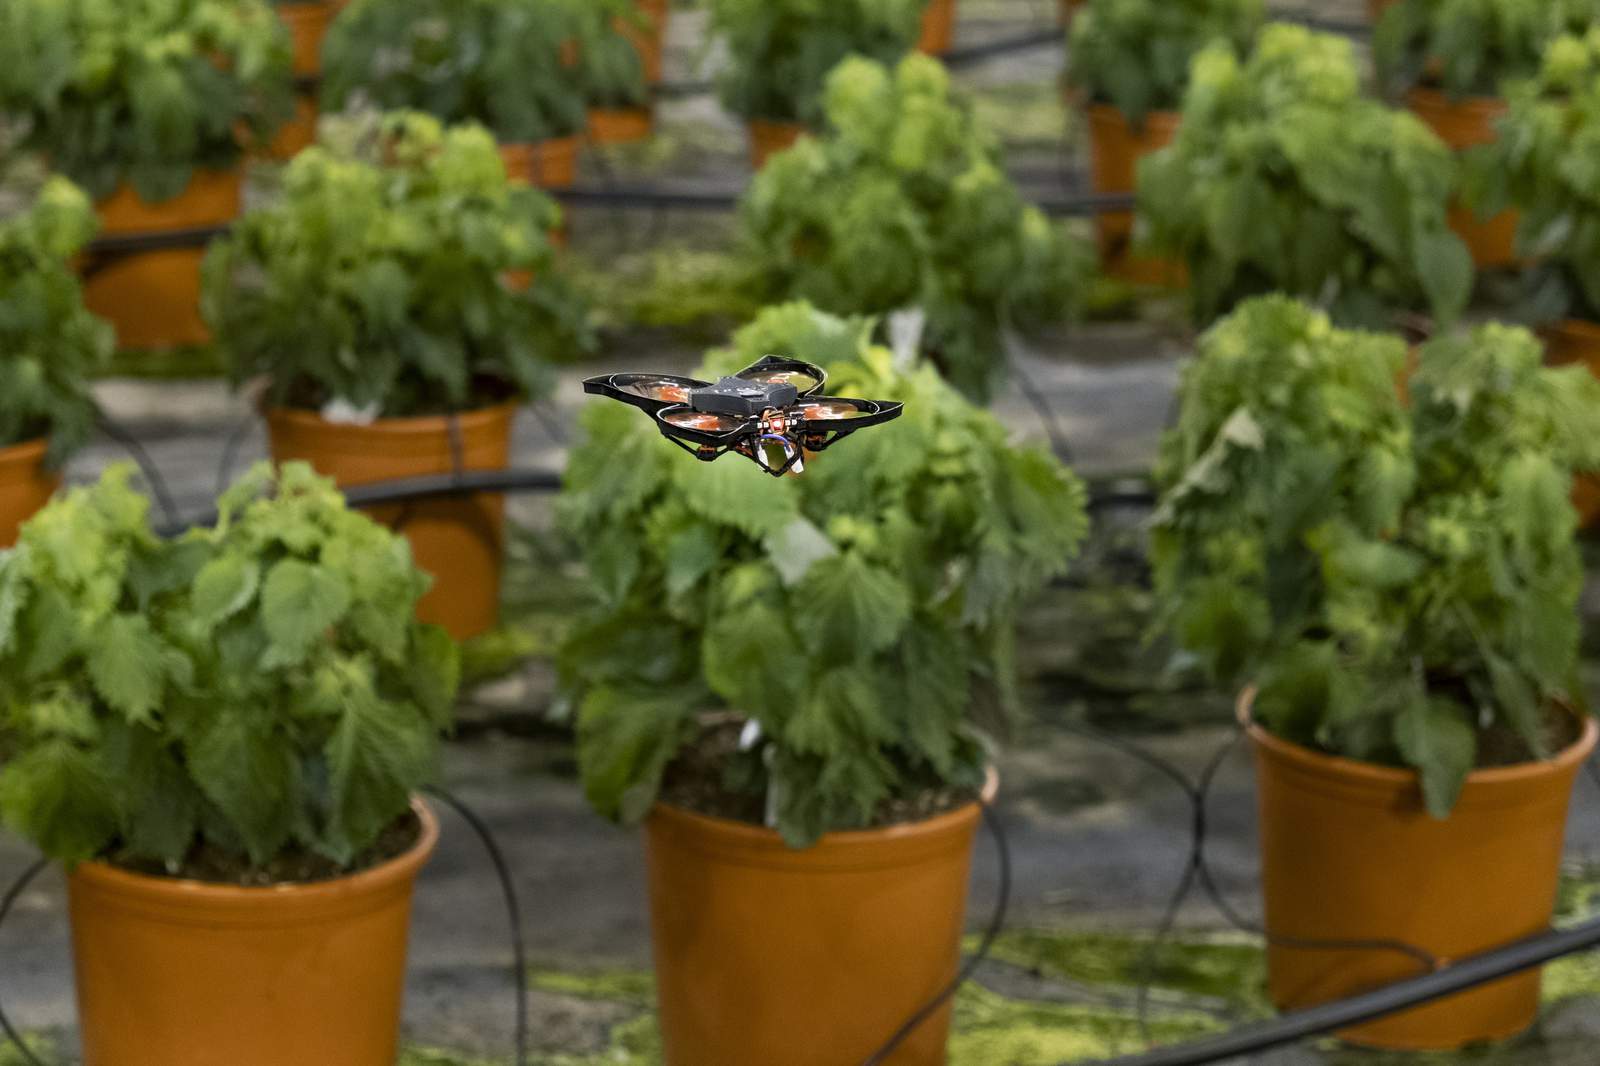 Drones vs hungry moths: Dutch use hi-tech to protect crops